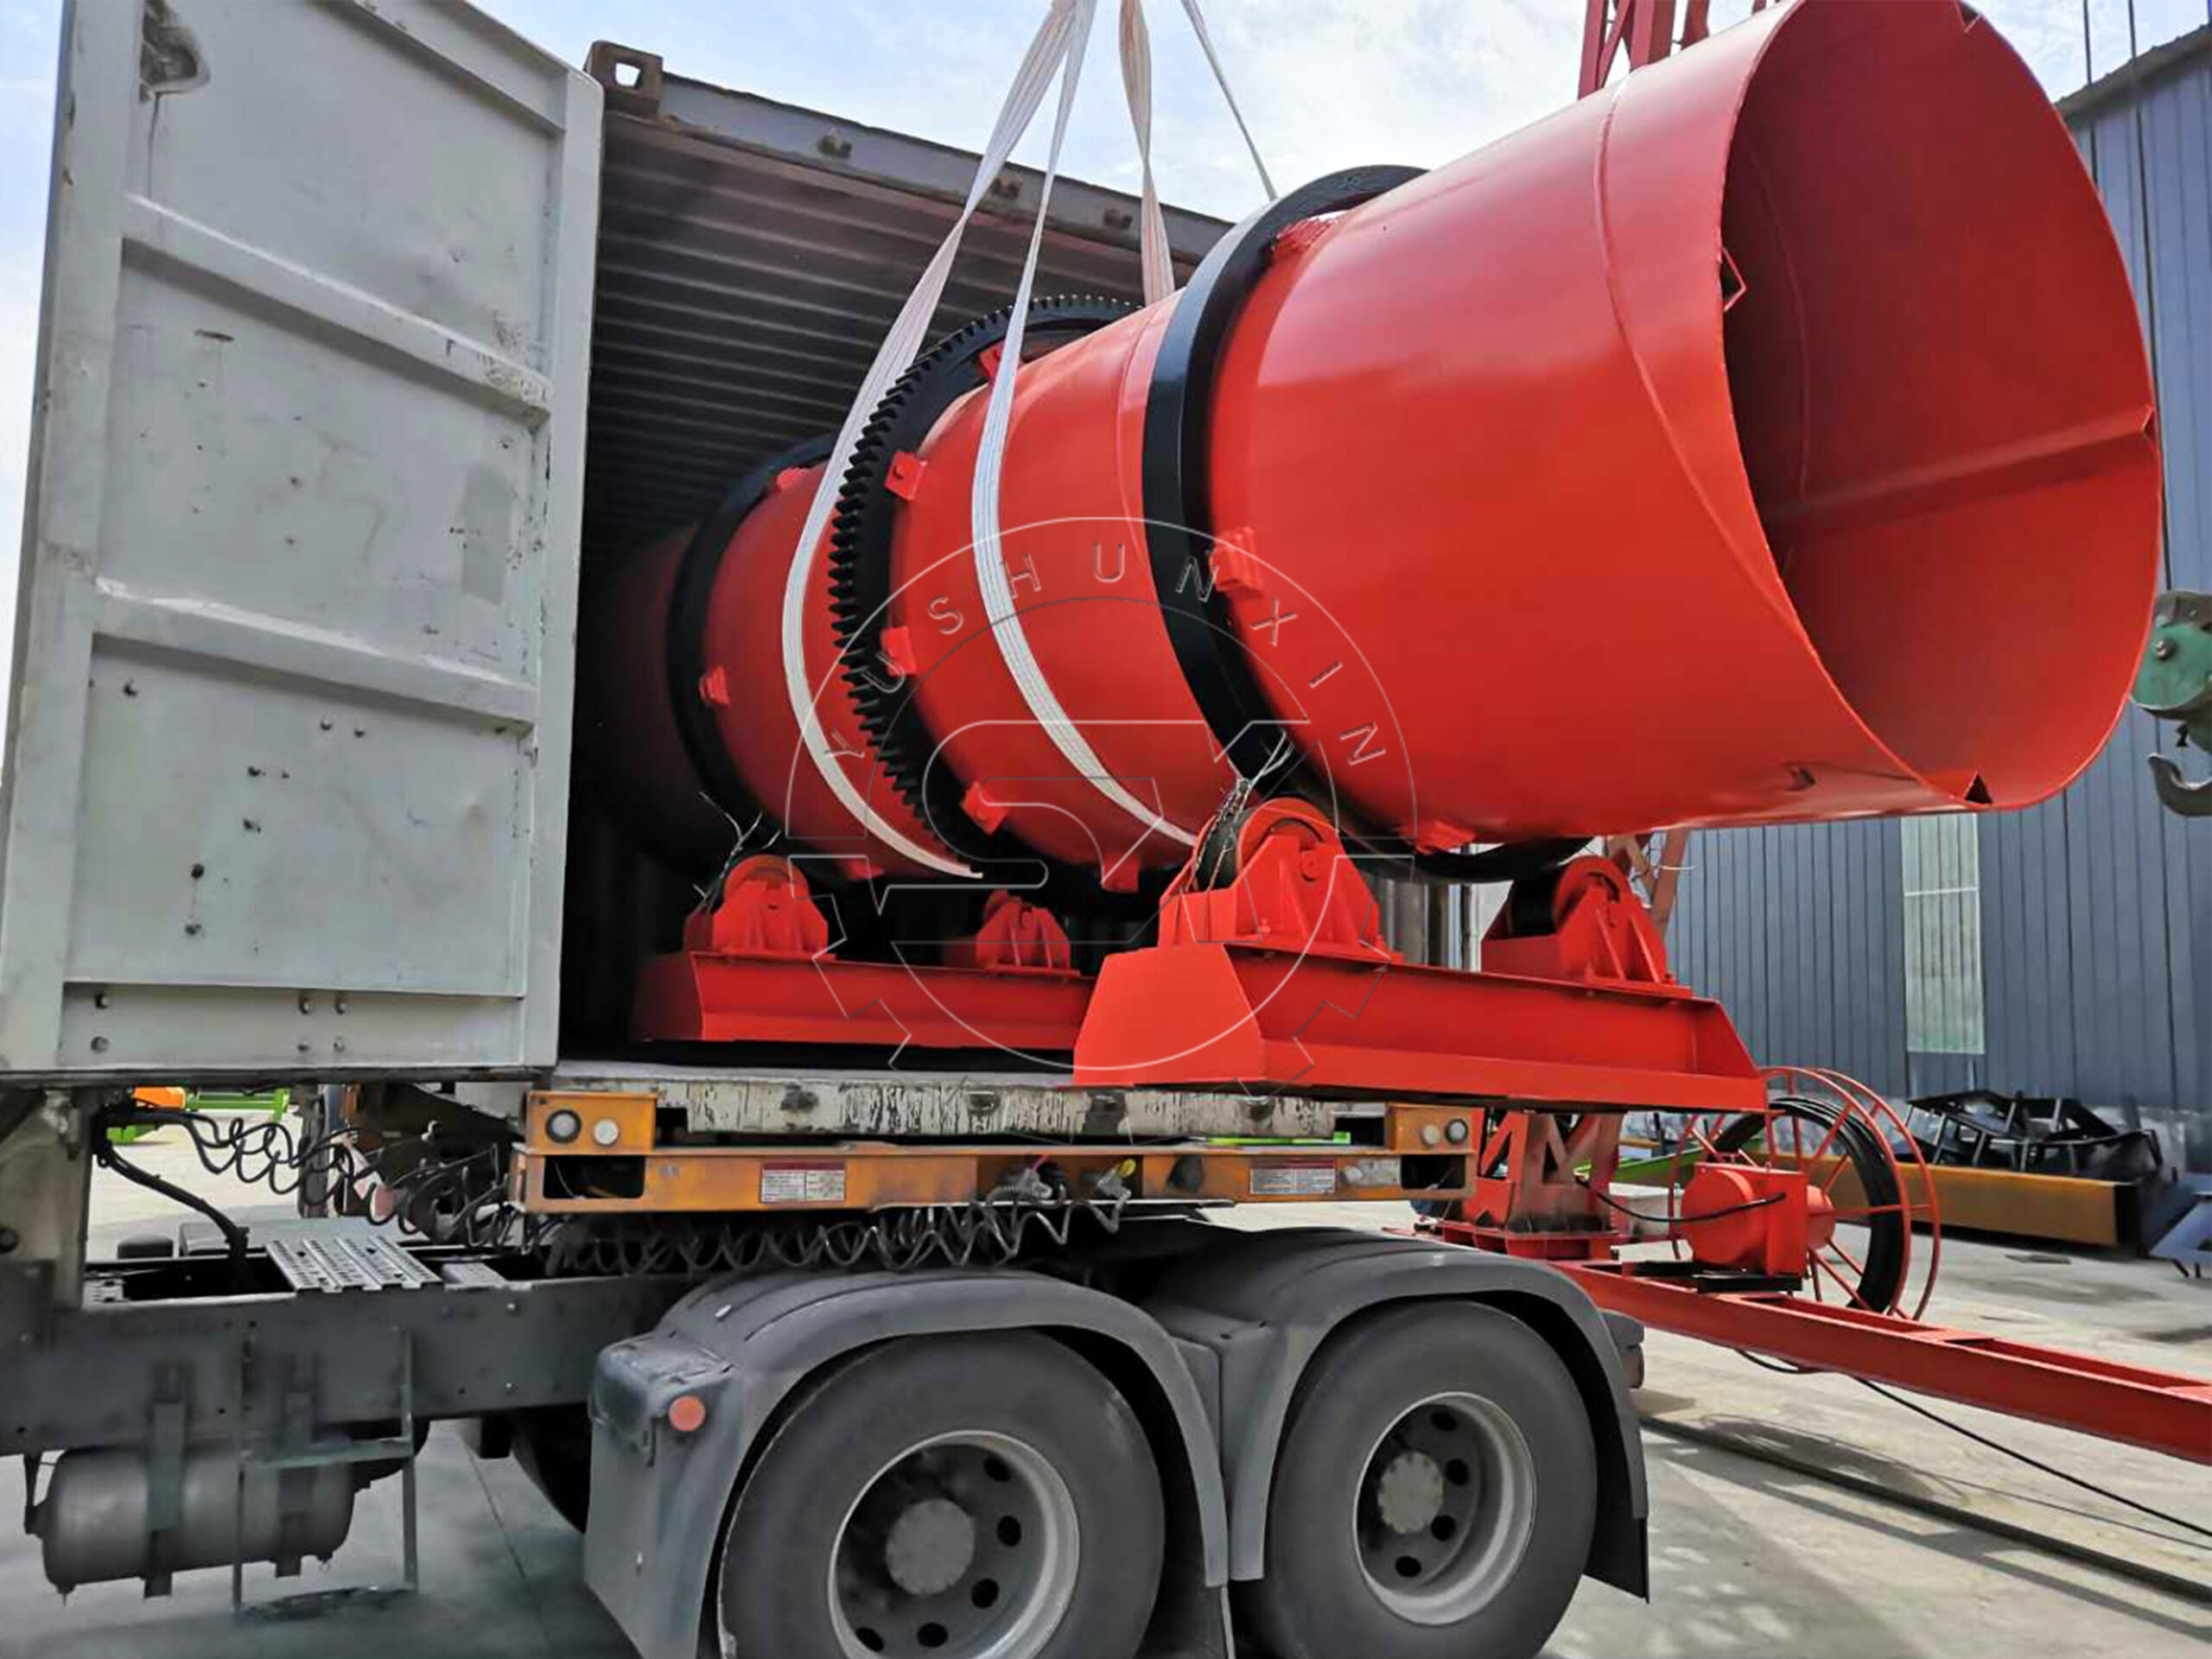 The Shipment of Rotary Drum Cooling Machine to Canada